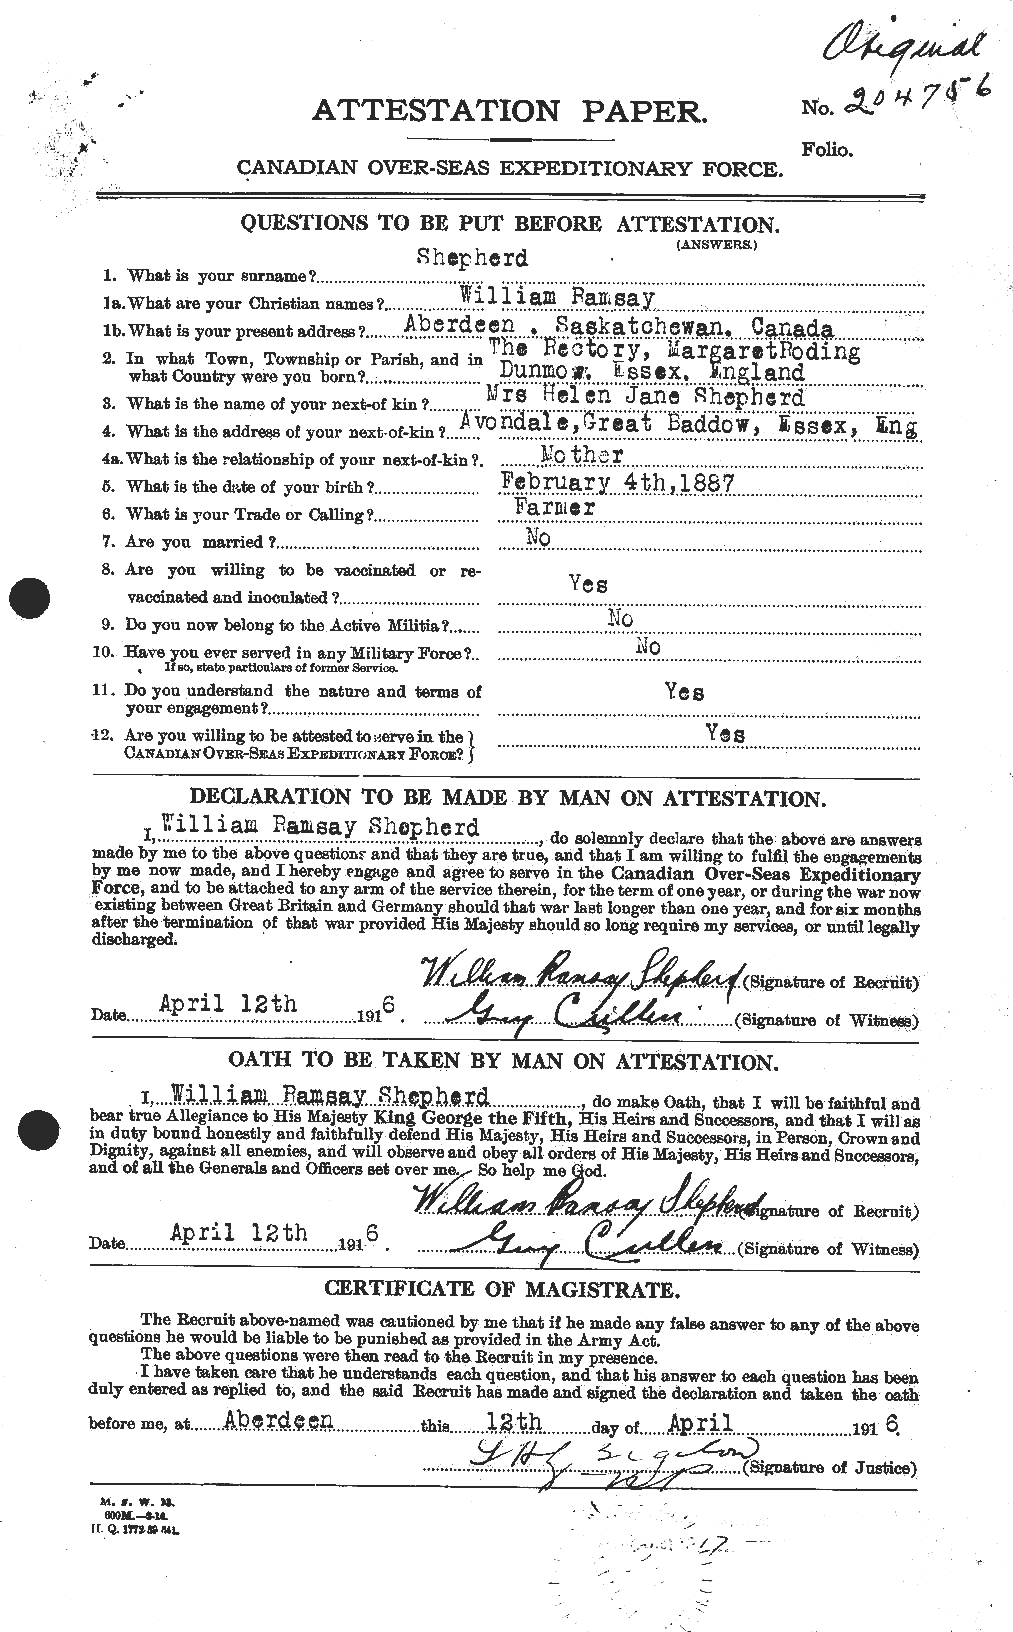 Personnel Records of the First World War - CEF 094457a